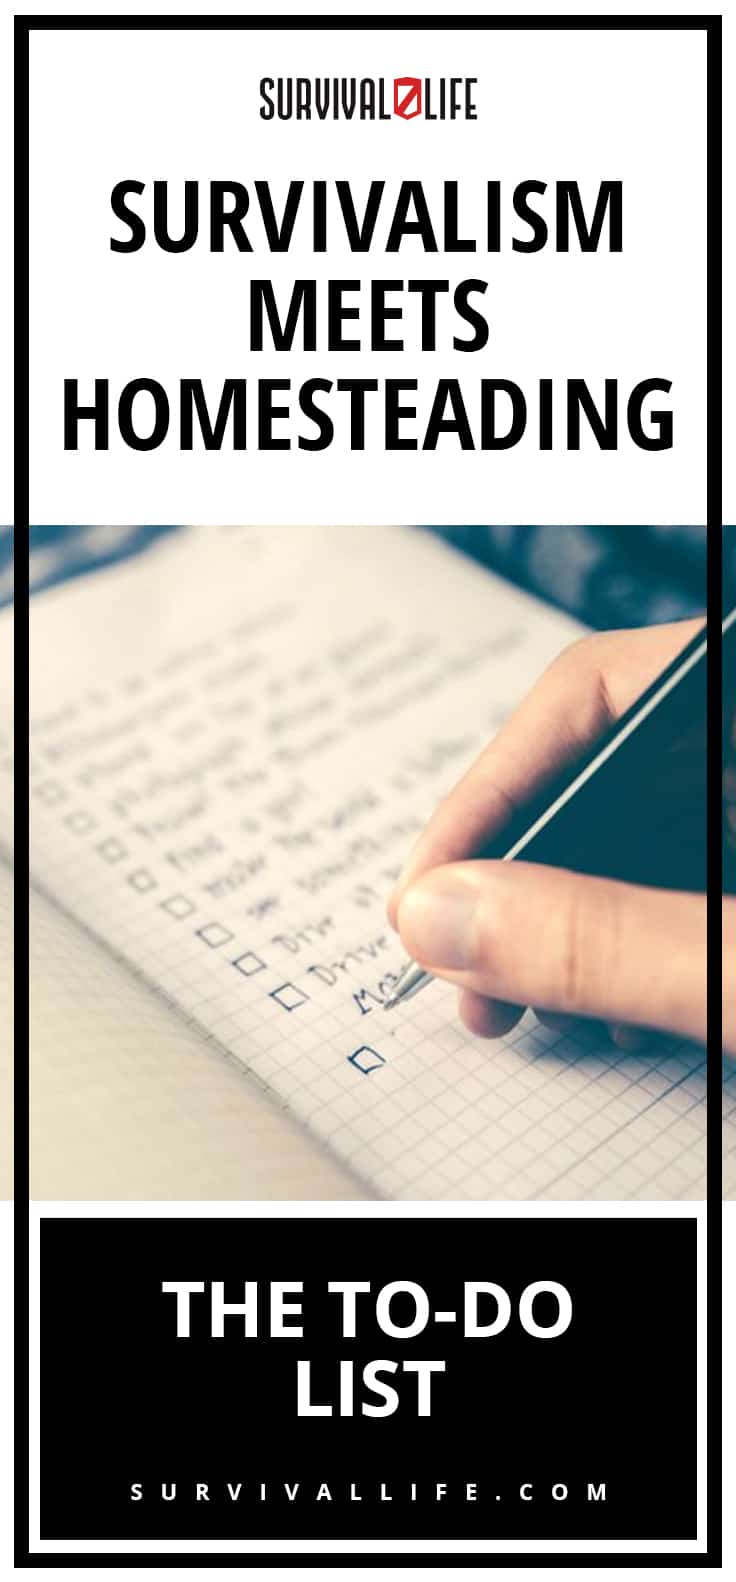 Survivalism Meets Homesteading: The To-Do List